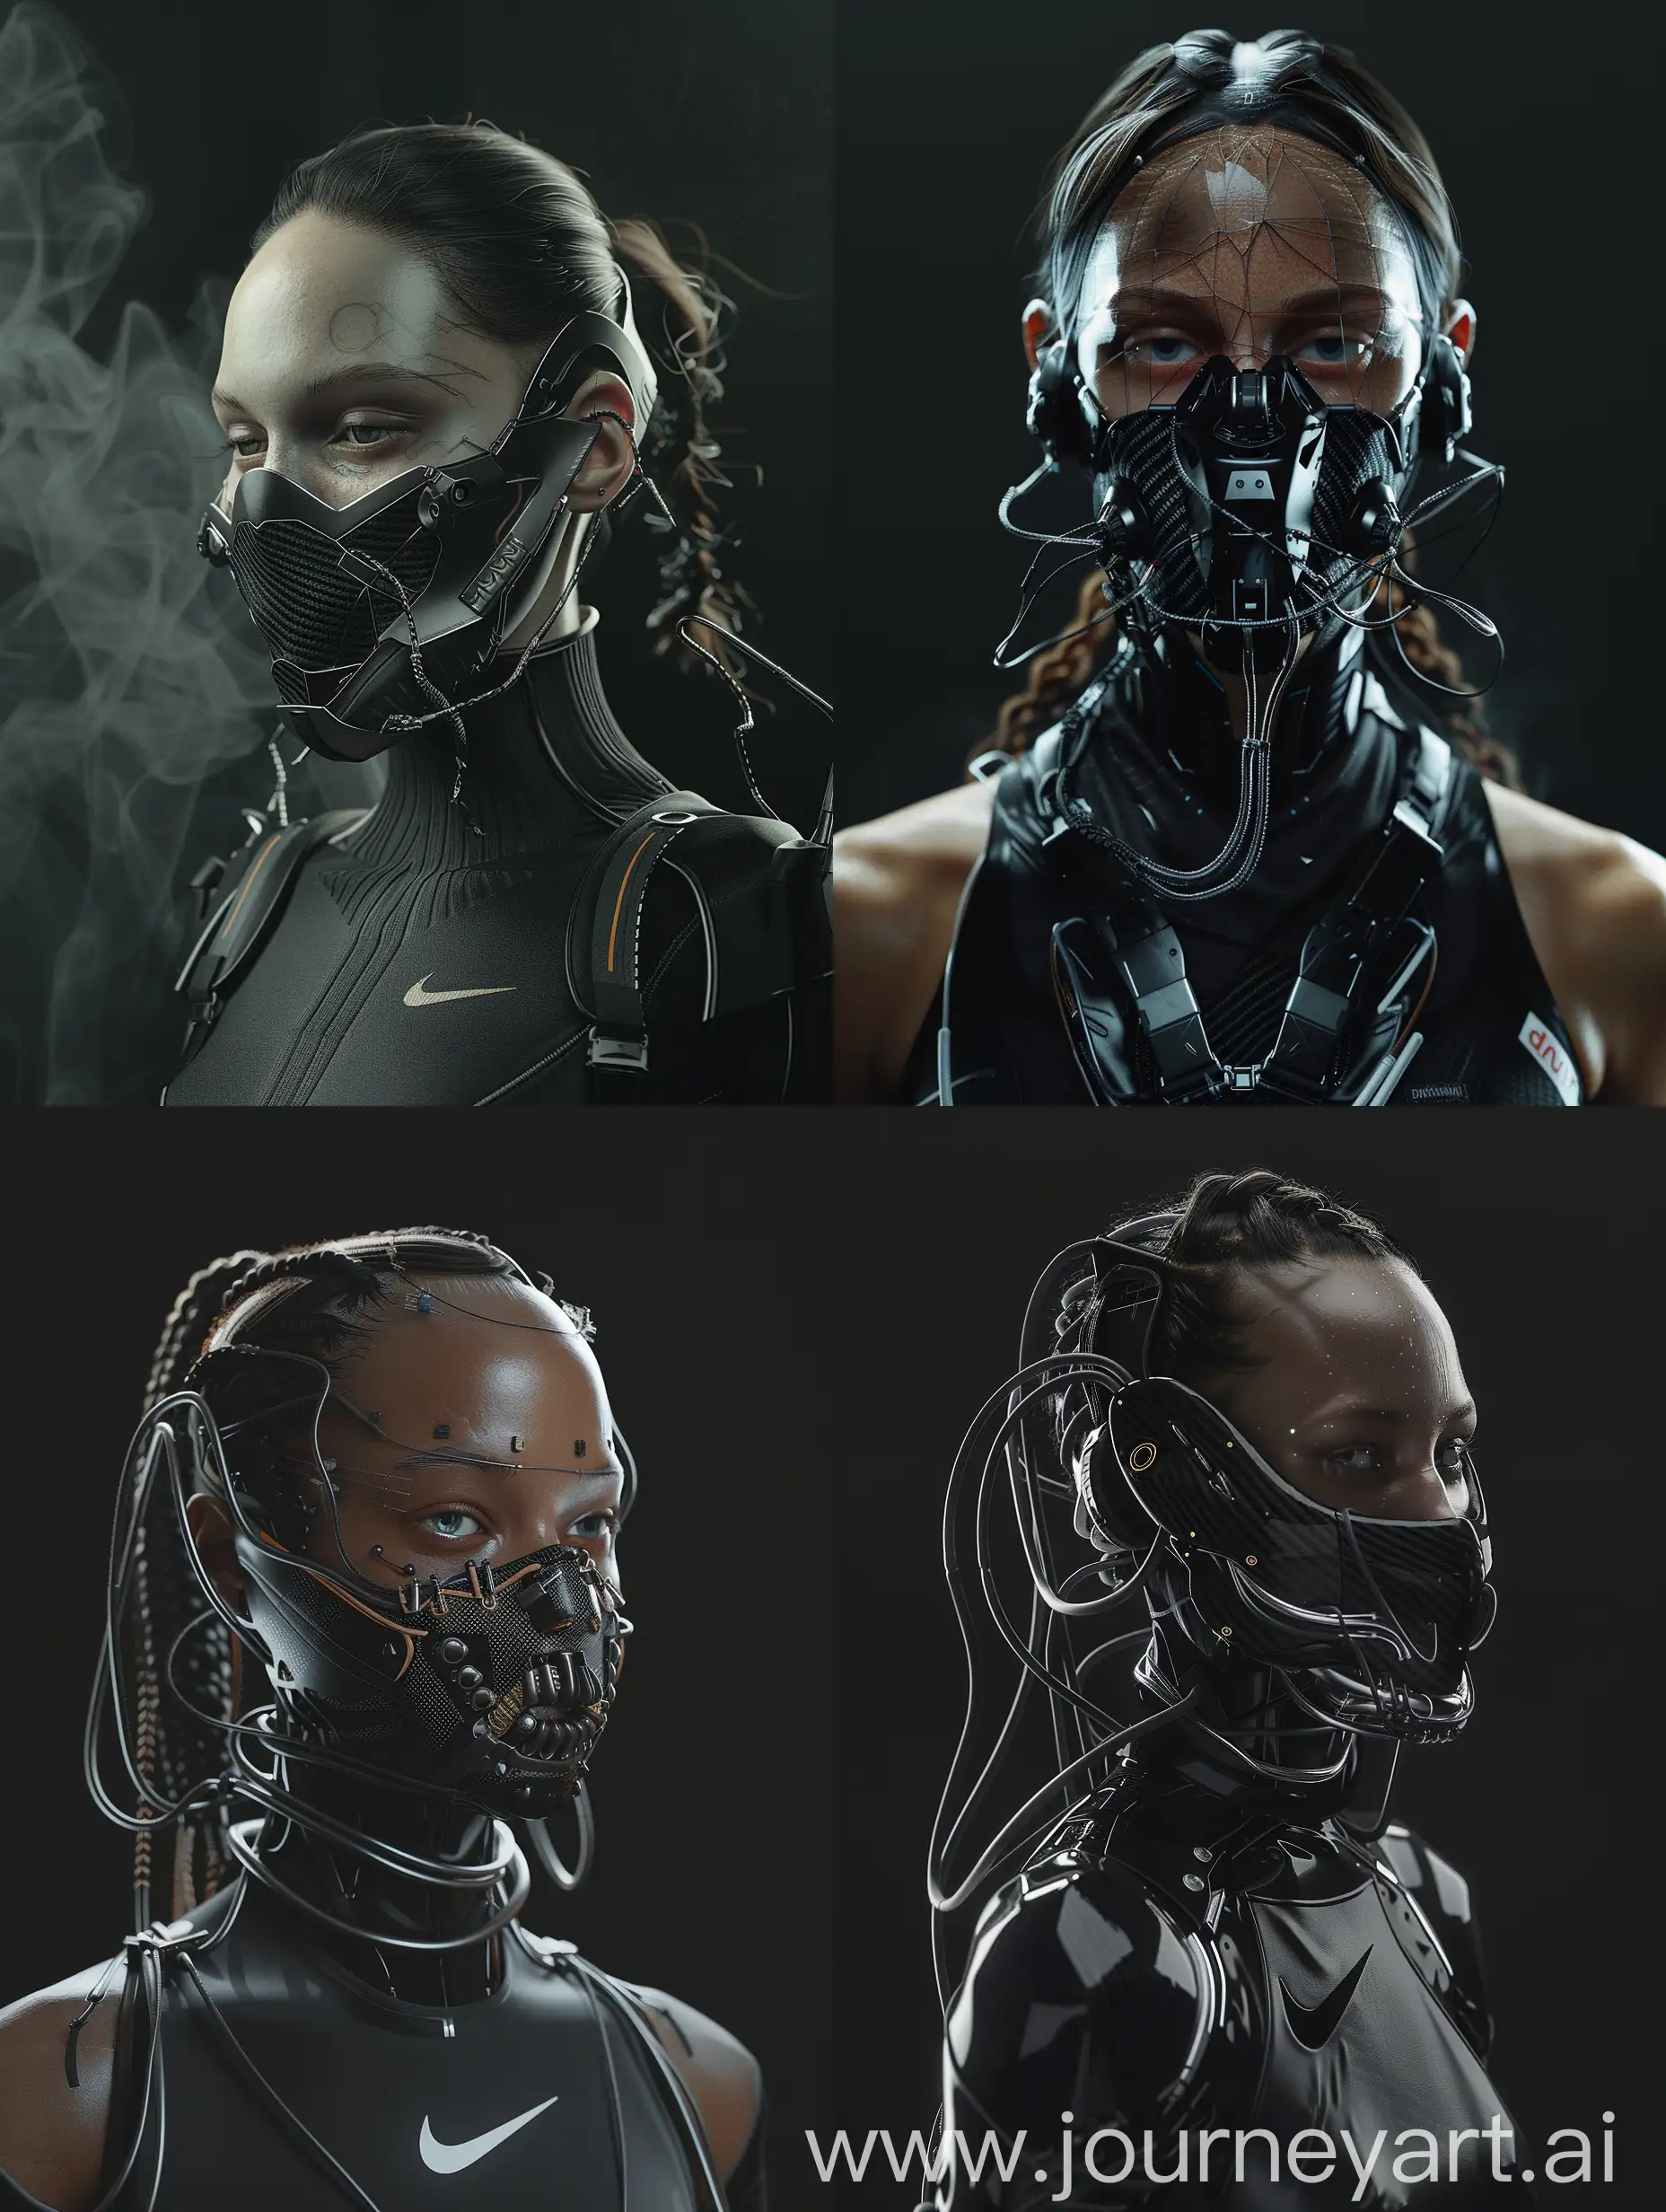 Futuristic-Cyberpunk-Character-with-Intricate-Cybernetic-Mask-and-NikeInspired-Addons